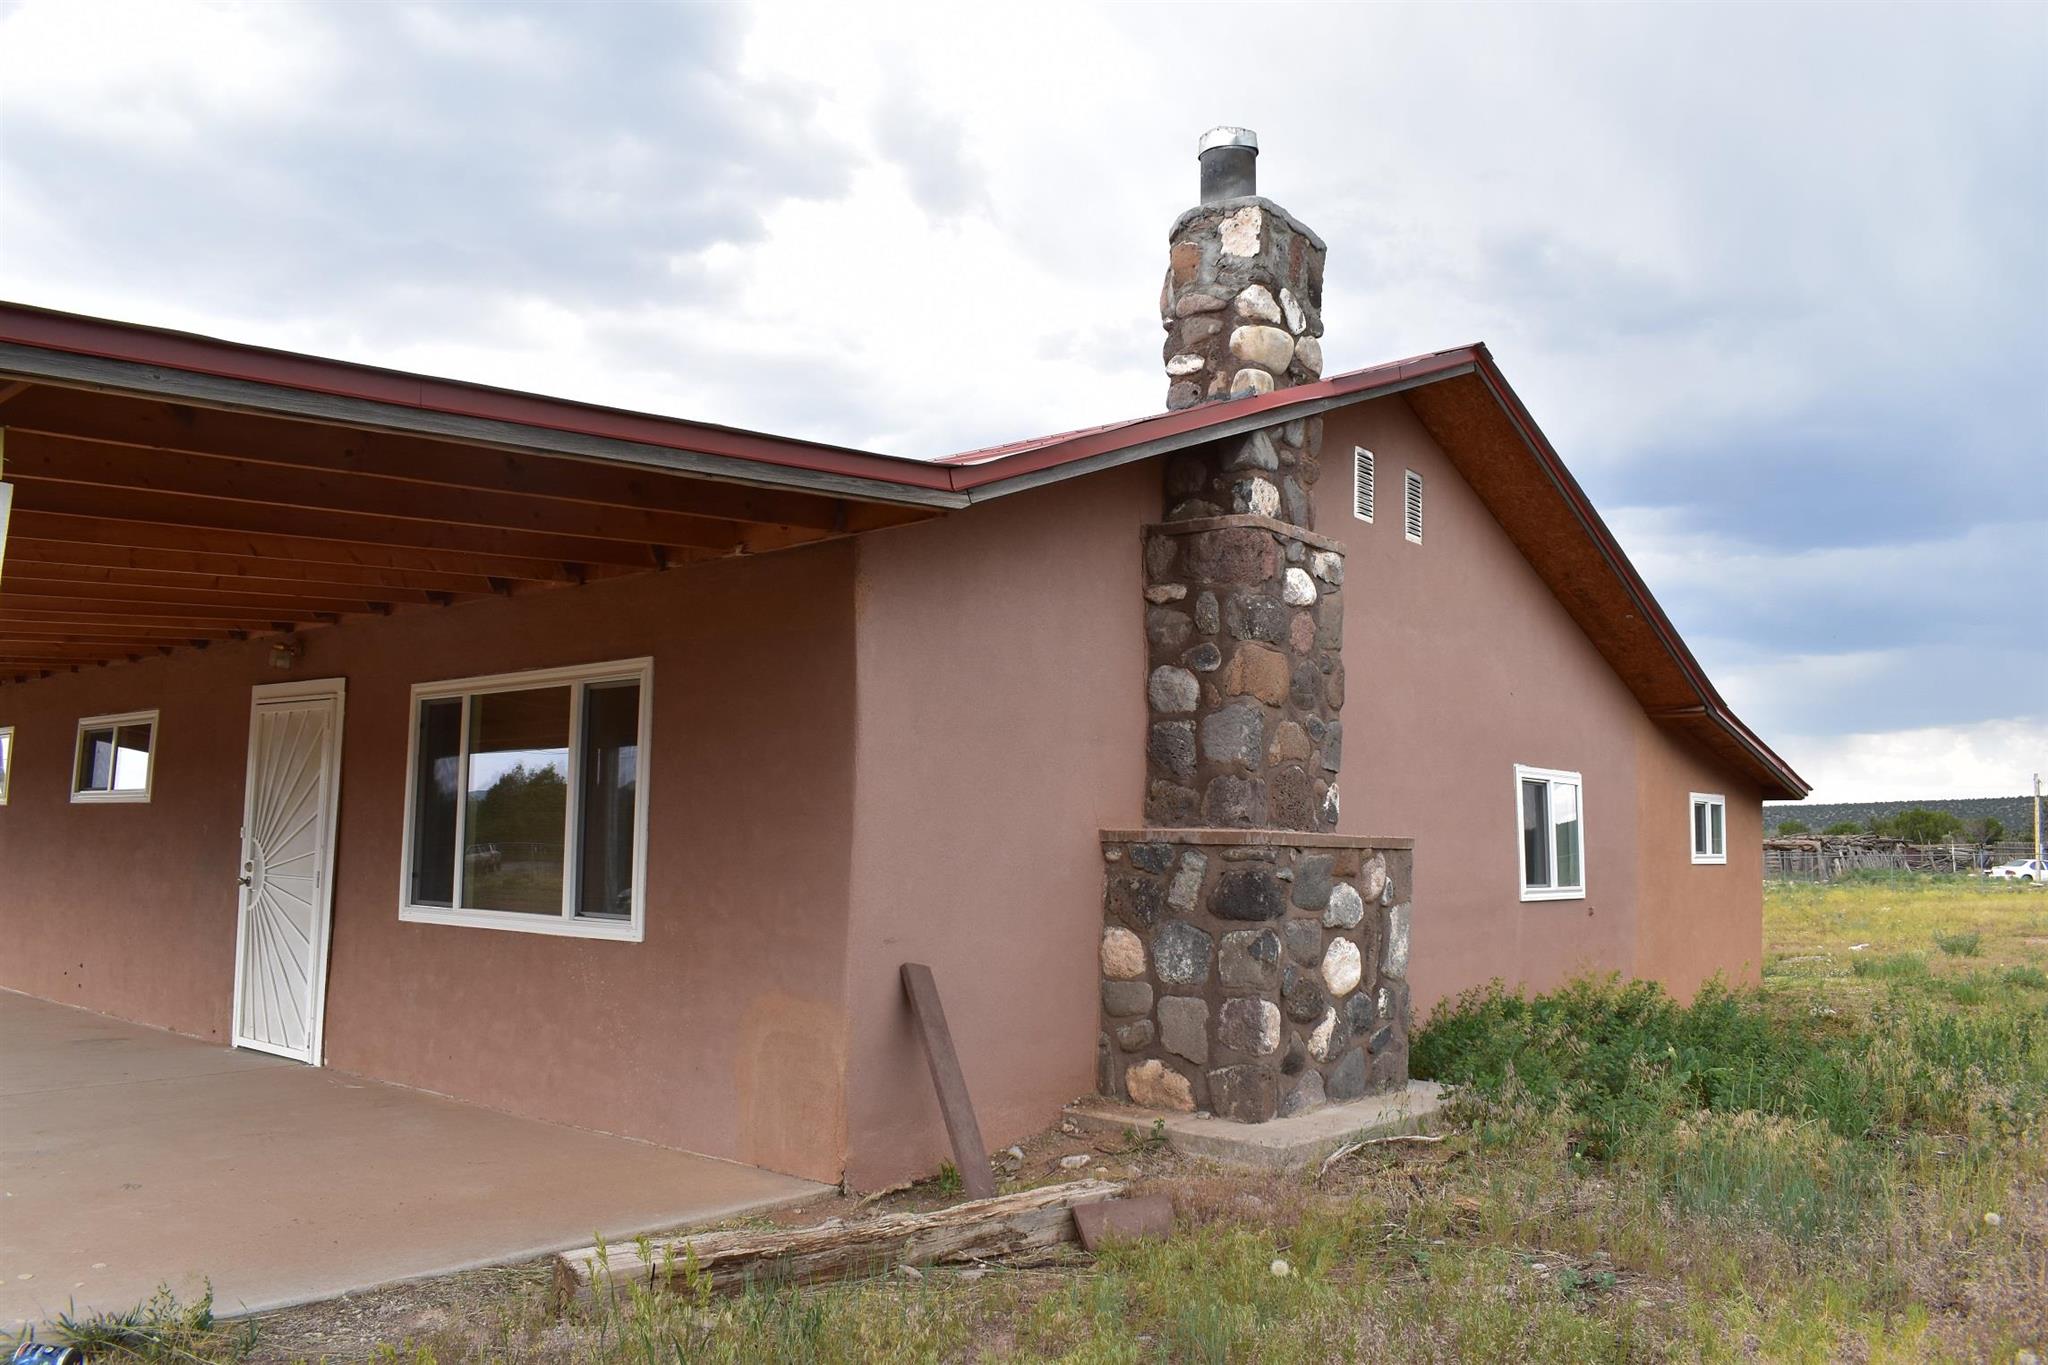 129 State Road 110, El Rito, New Mexico 87530-0000, 3 Bedrooms Bedrooms, ,1 BathroomBathrooms,Residential,For Sale,129 State Road 110,202103090